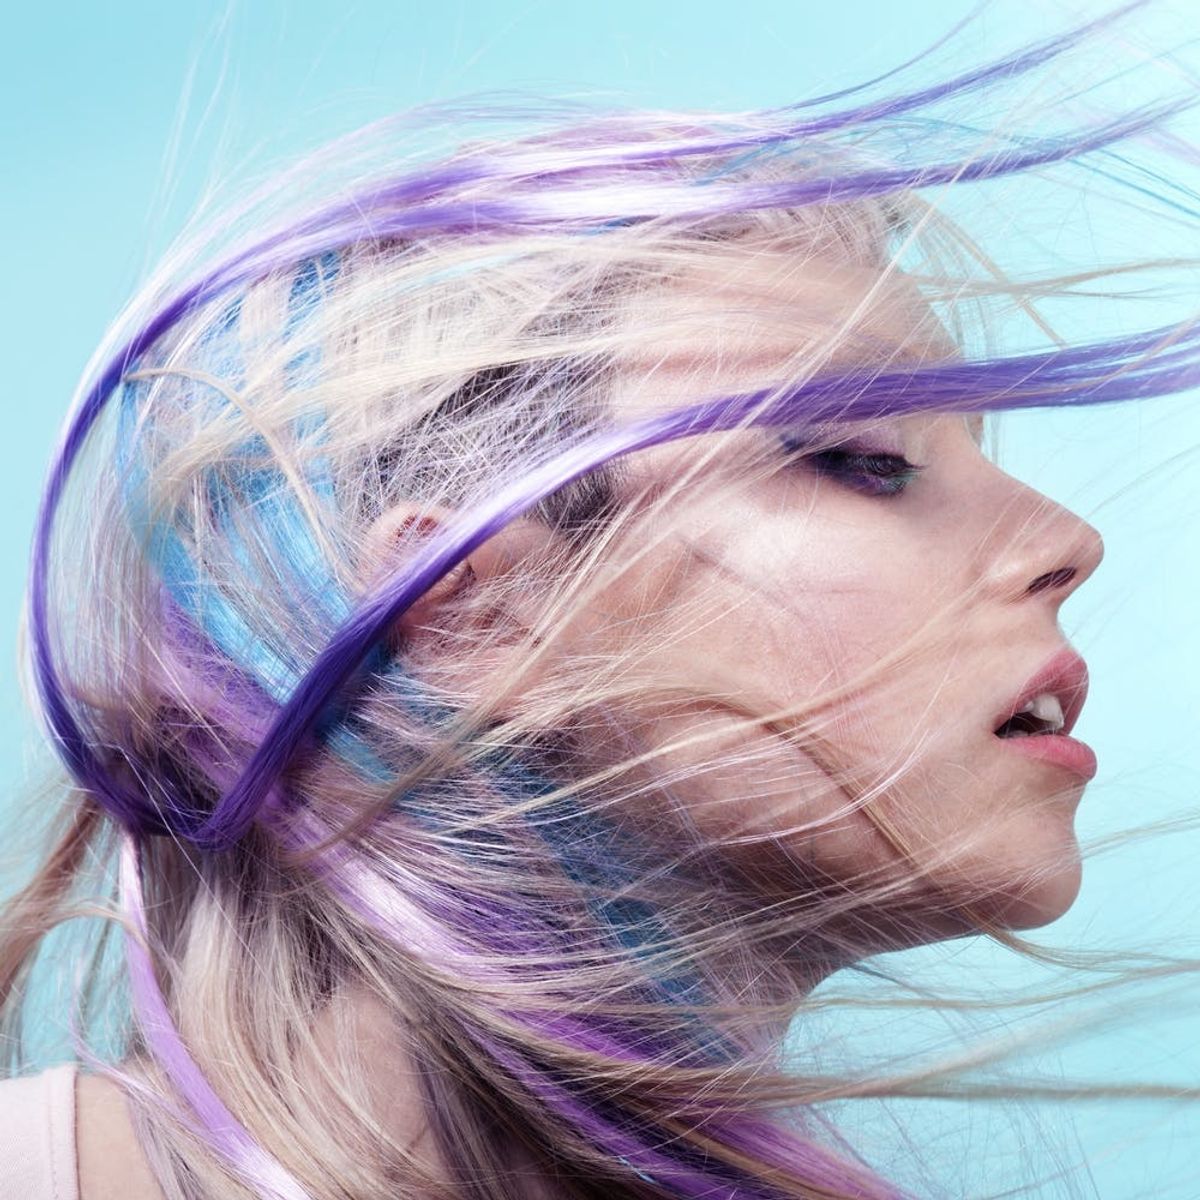 Mood-Changing Hair Is Now a Thing and We Have a RL Witch to Thank for It